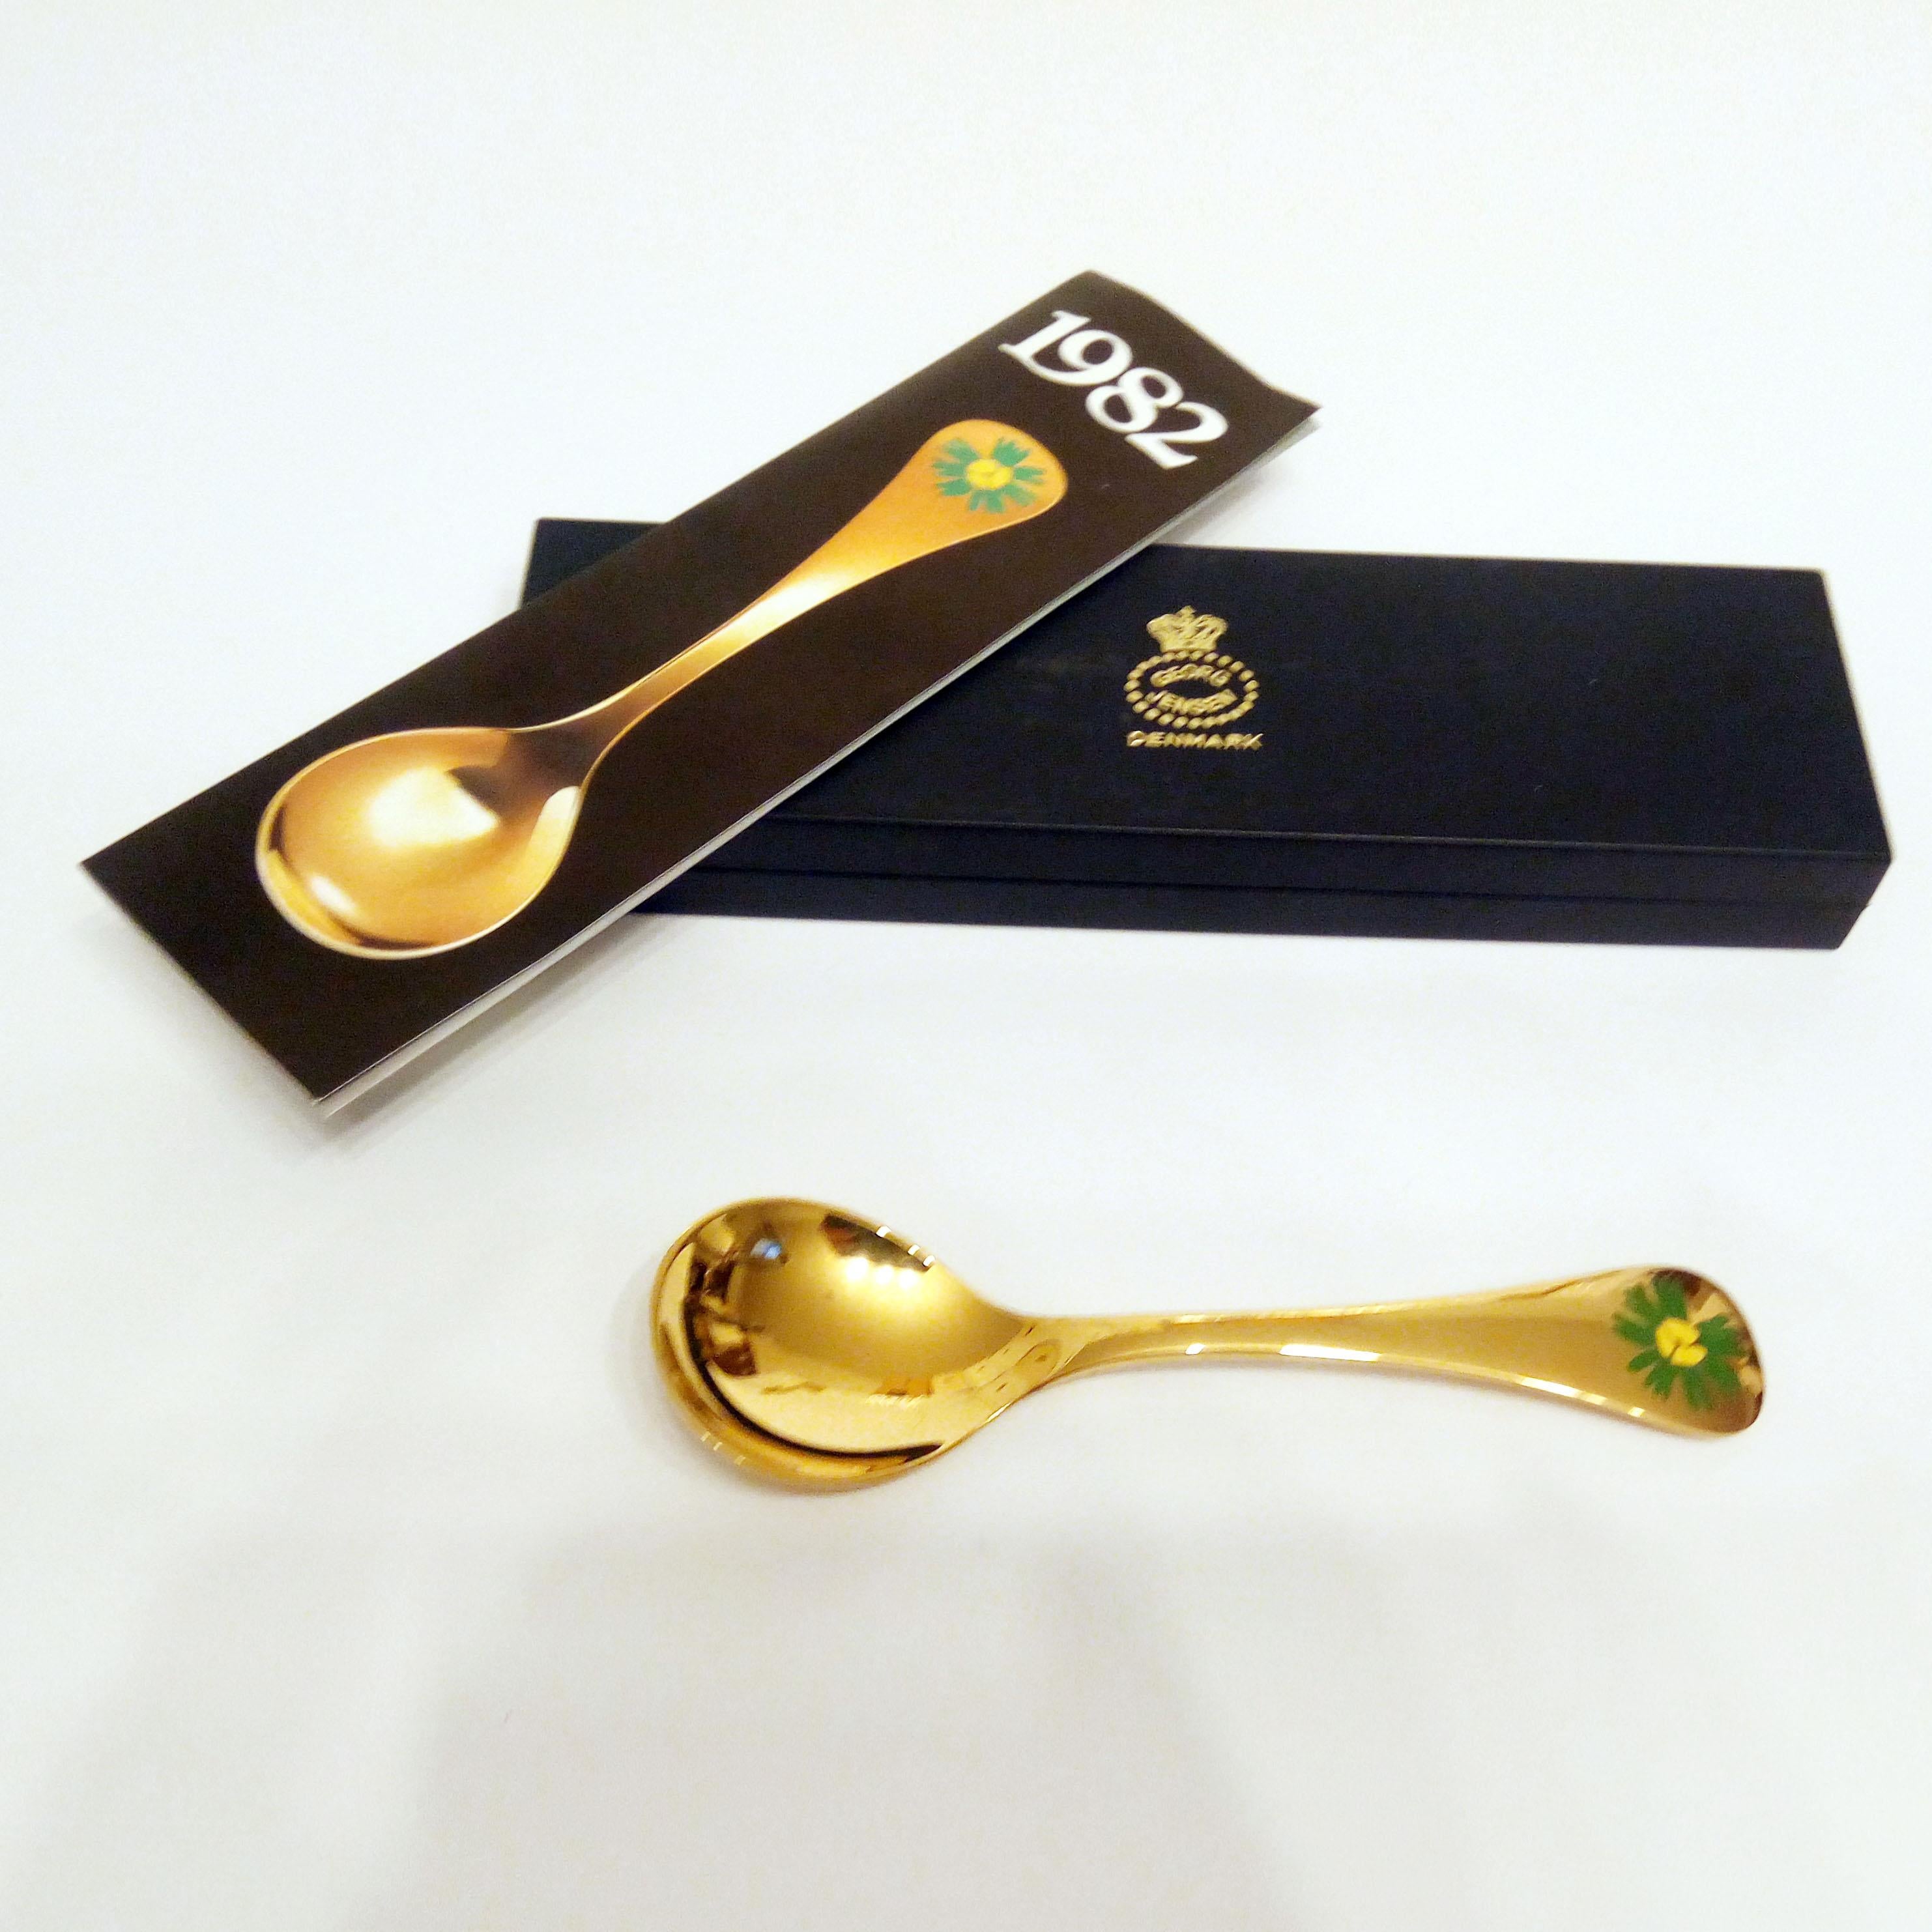 Annual spoon 1982 in original box, designed by Annelise Björner, edited by Georg Jensen.
Annual spoons series began in 1971. Each spoon is crafted in sterling silver, then gold-plated and enameled with a wildflower chosen for that year. The 1982